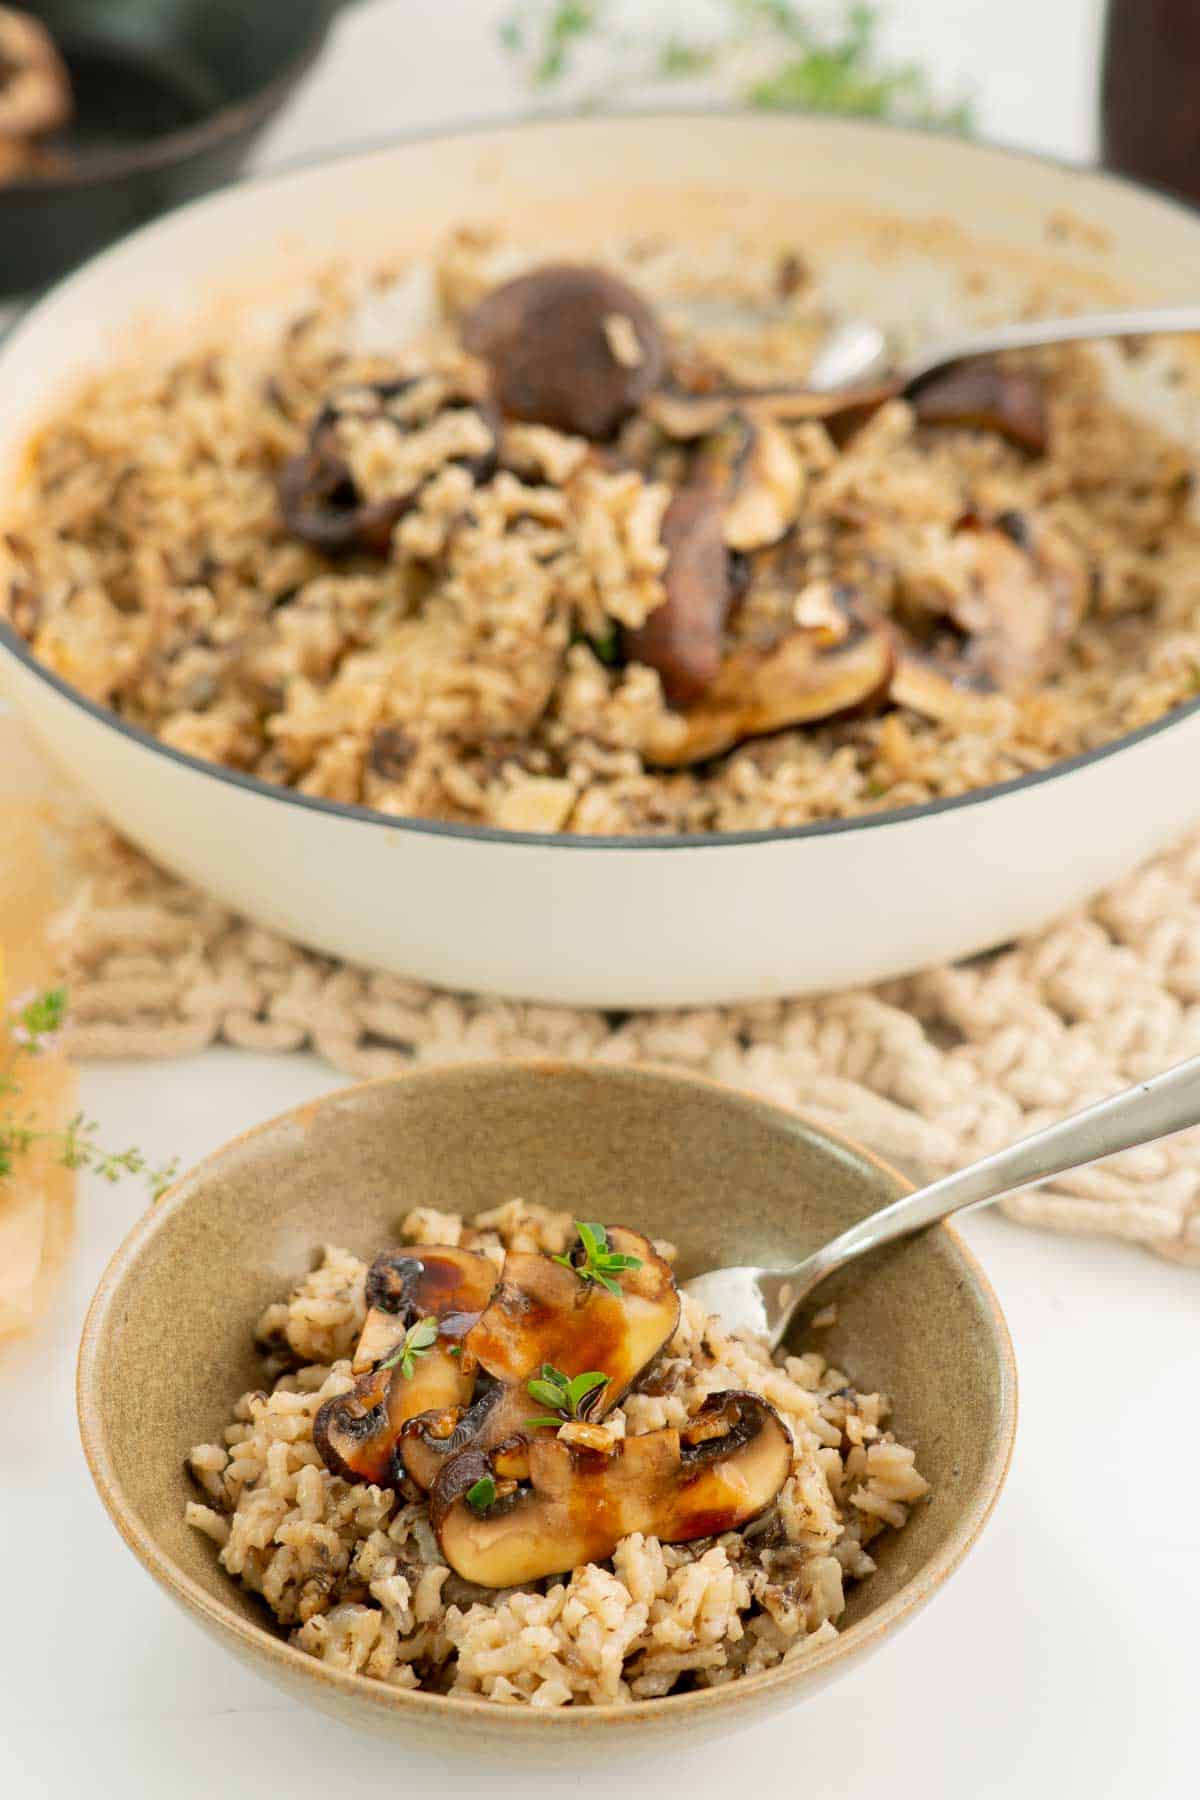 a serving of mushroom risotto on a table with a large dish of risotto.